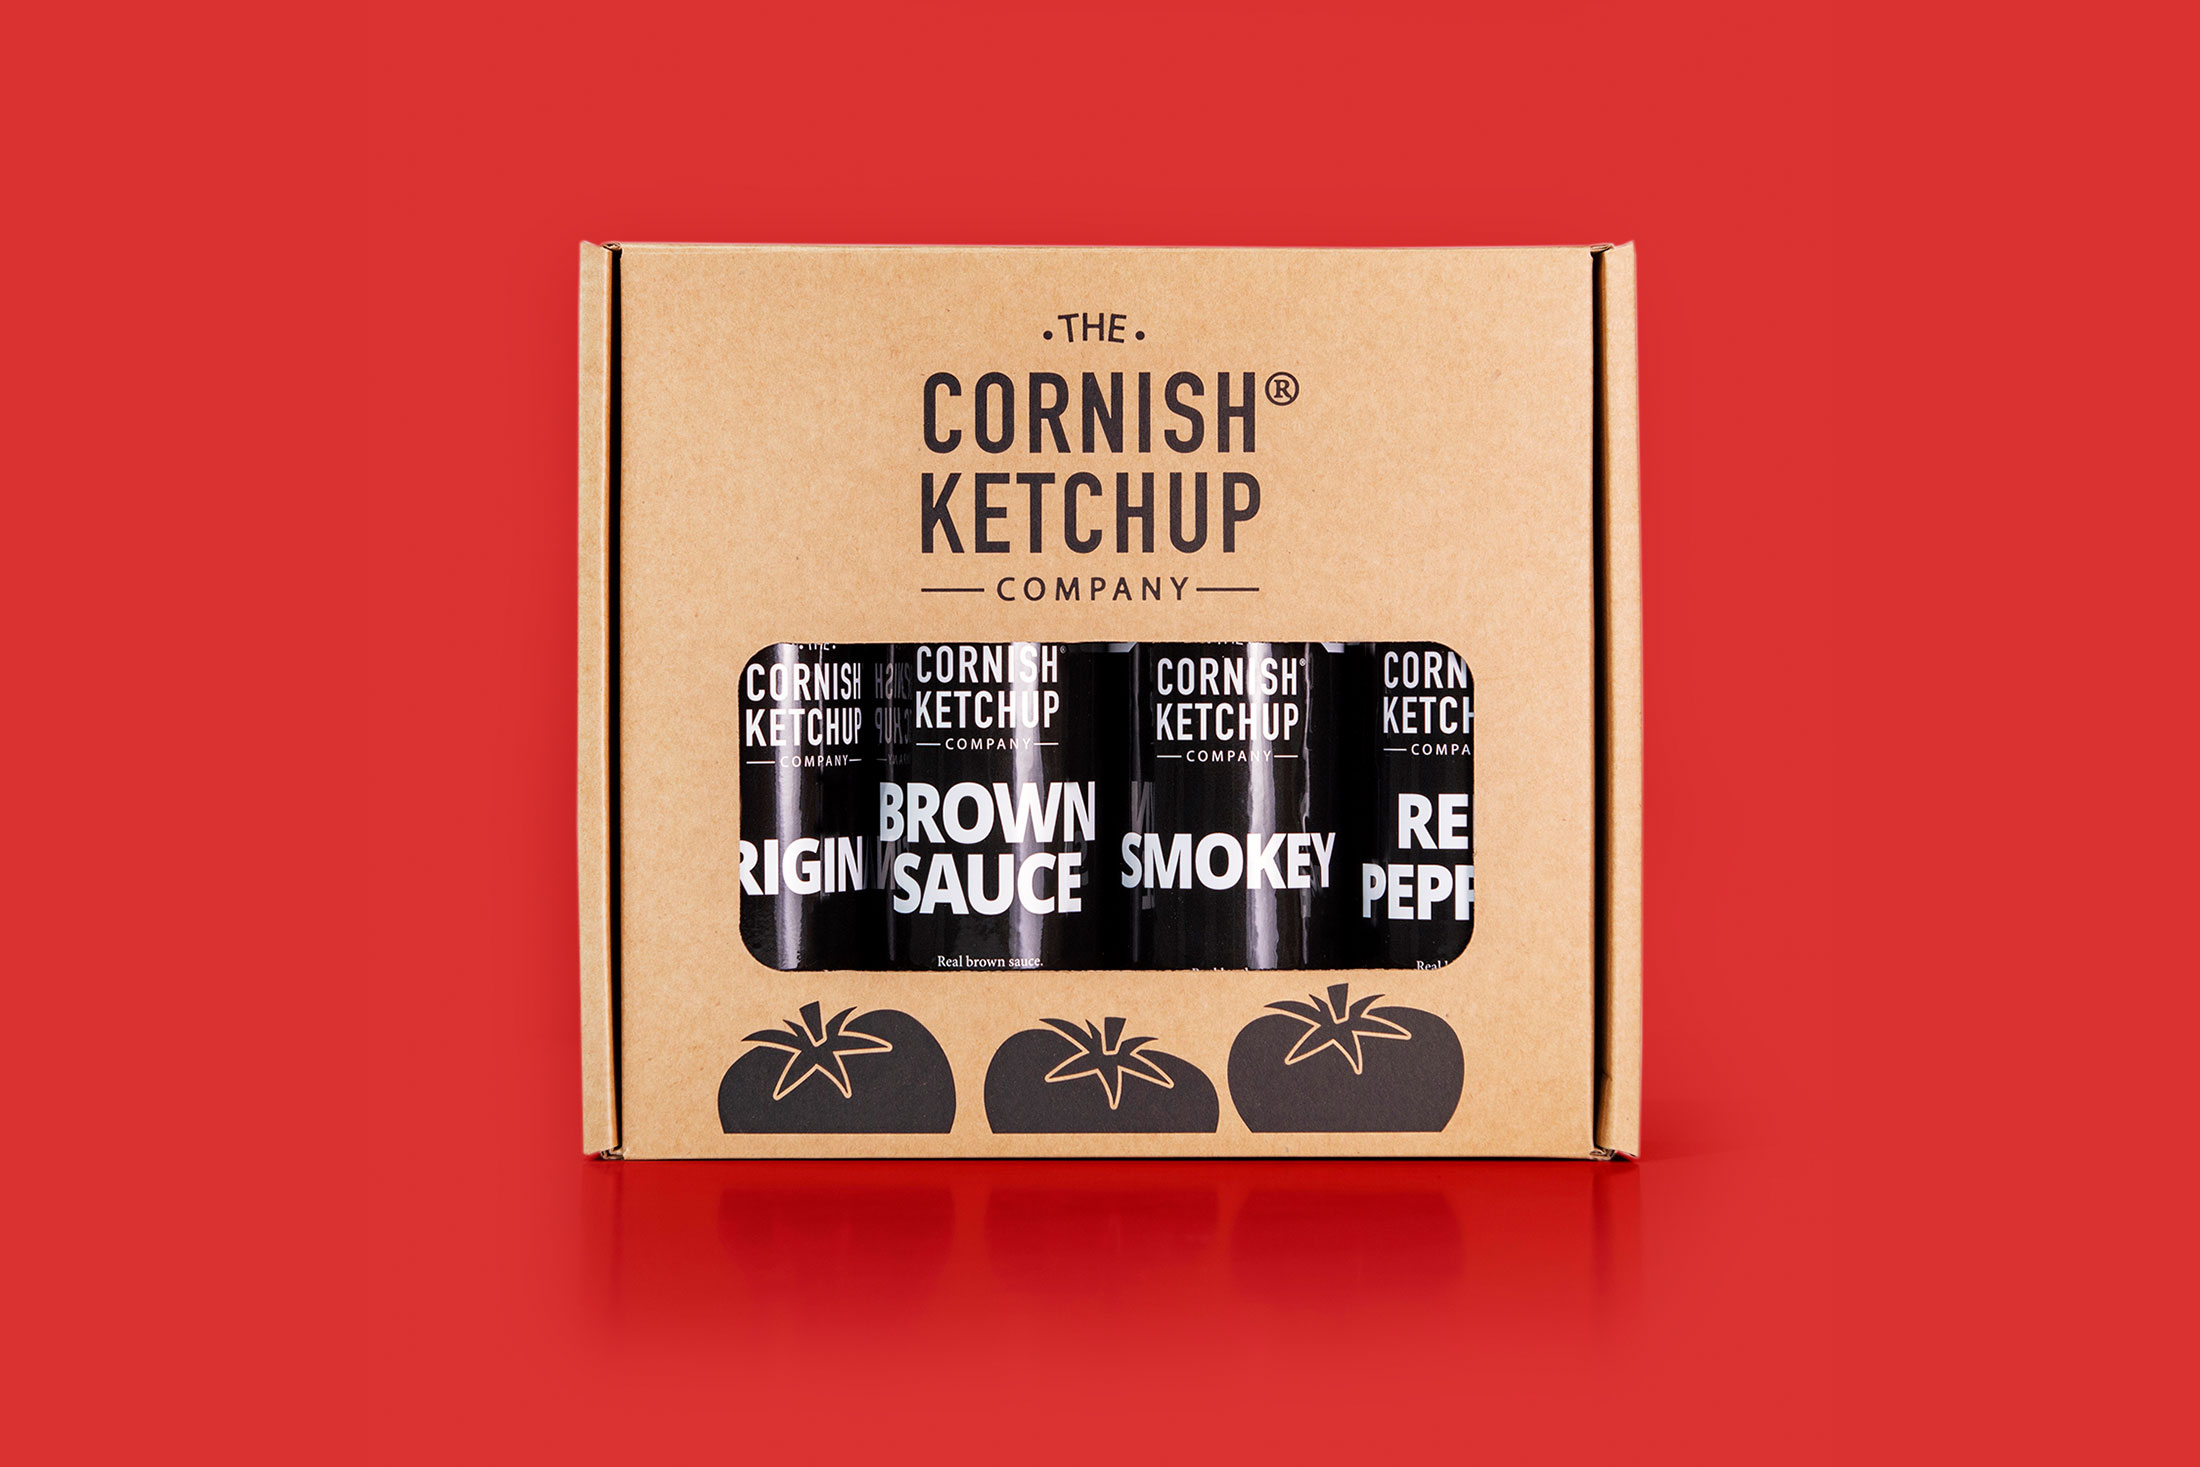 Cornish Ketchup gift pack with four bottles of ketchup on a red background